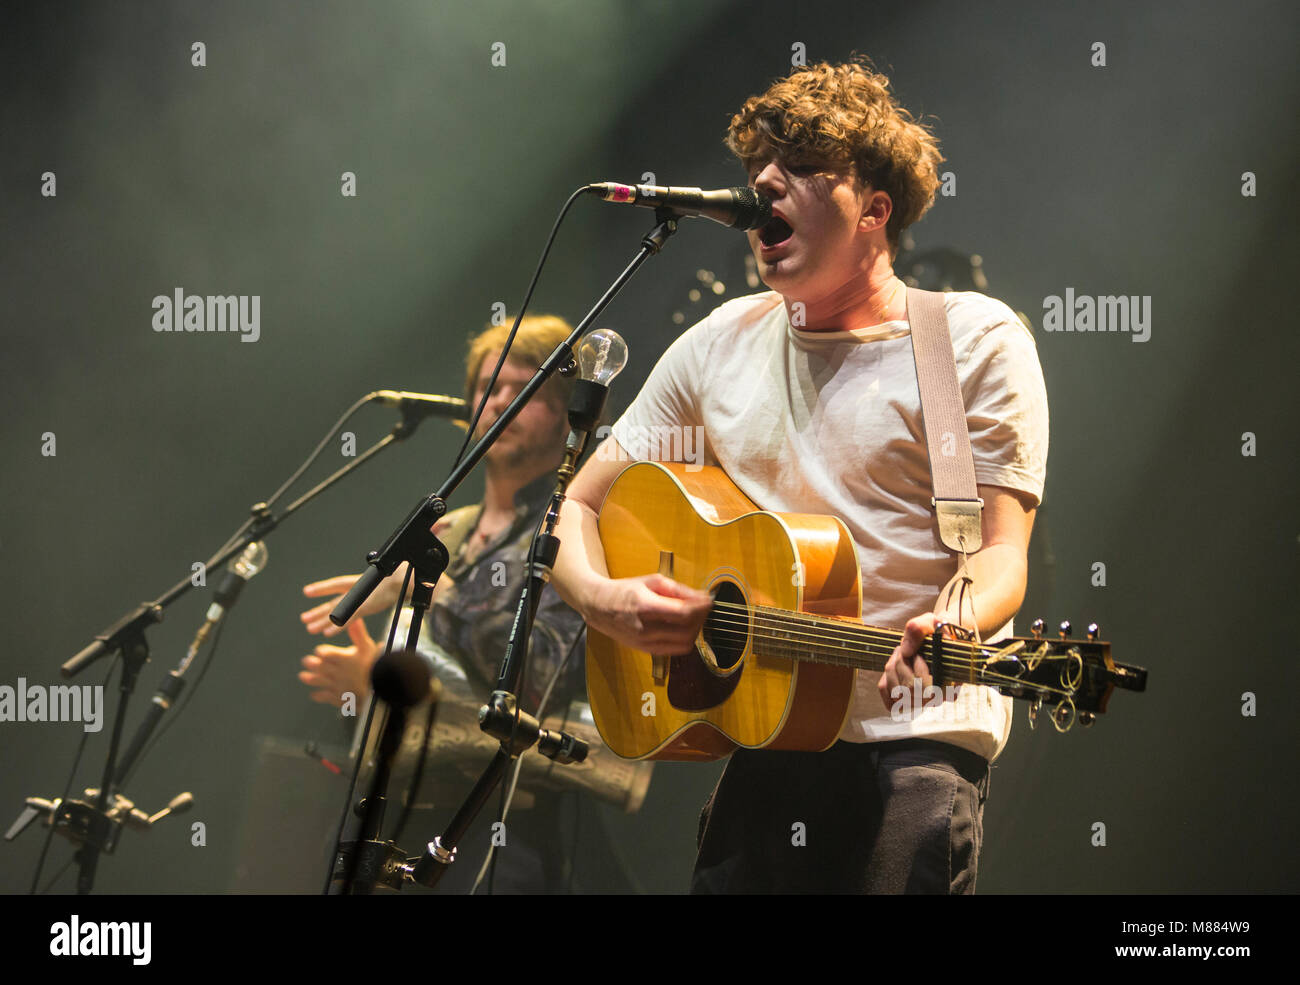 Wetzlar, Germany. 14th Mar, 2018. Faber, Swiss singer-songwriter with band Goran Koč y Vocalist Orkestar, support act for band Kraftklub, at Rittal-Arena Wetzlar. Faber (real Julian Pollina), born in 1993, is the son of Italian singer-songwriter Pippo Pollina. Credit: Christian Lademann Stock Photo